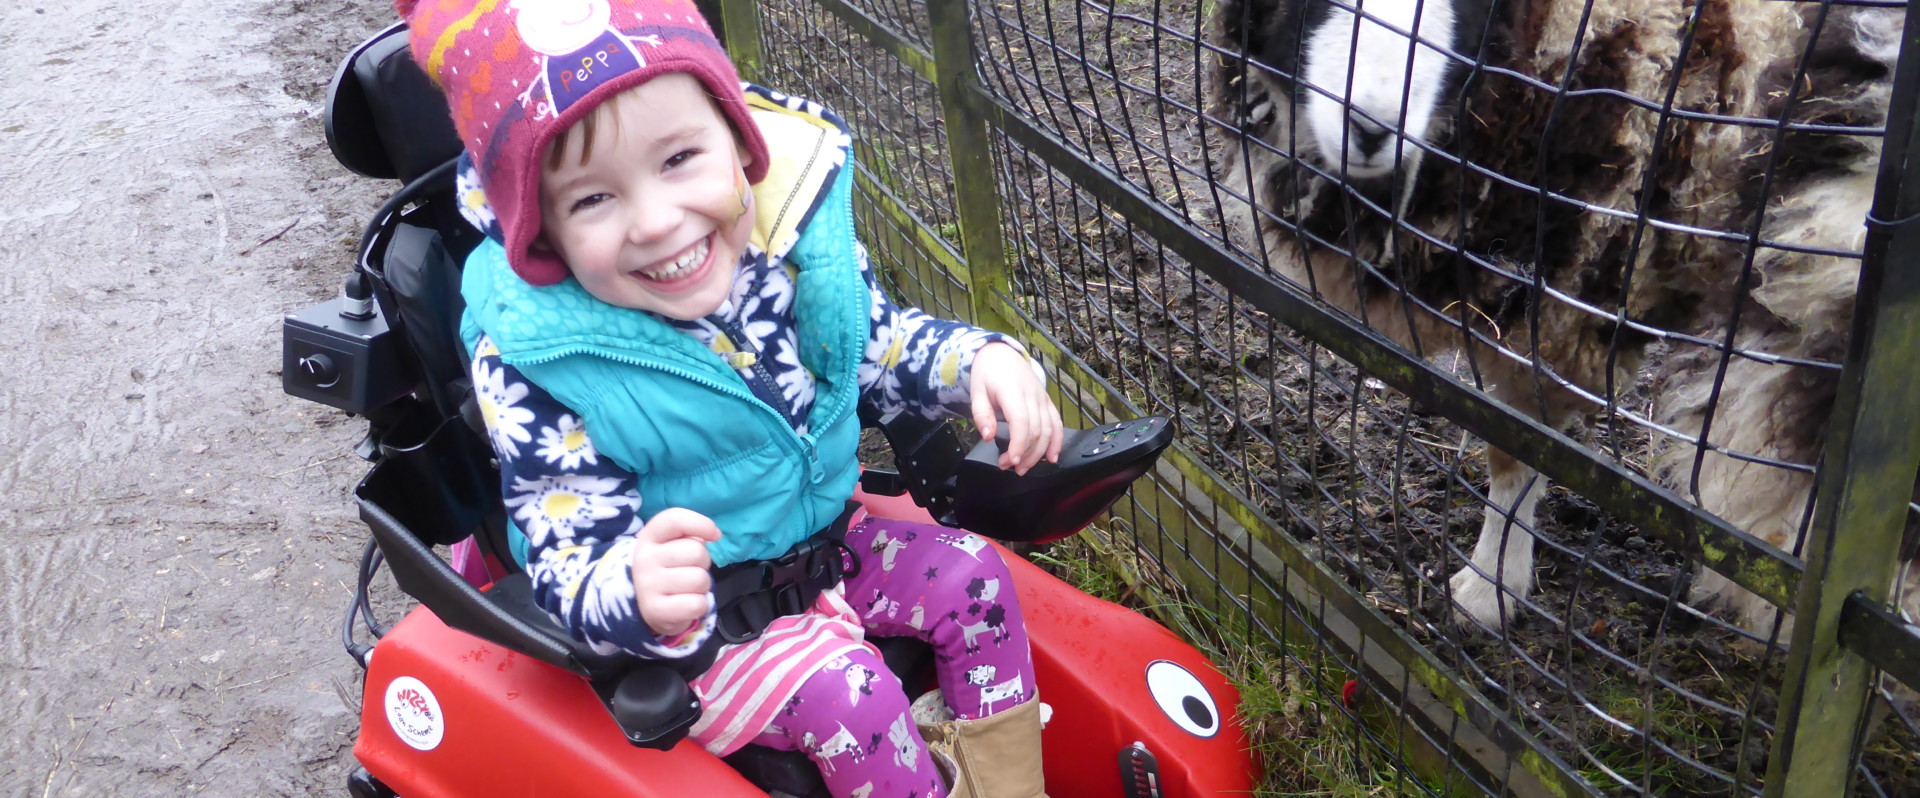 Little girl in her Wizzybug powered wheelchair with a sheep